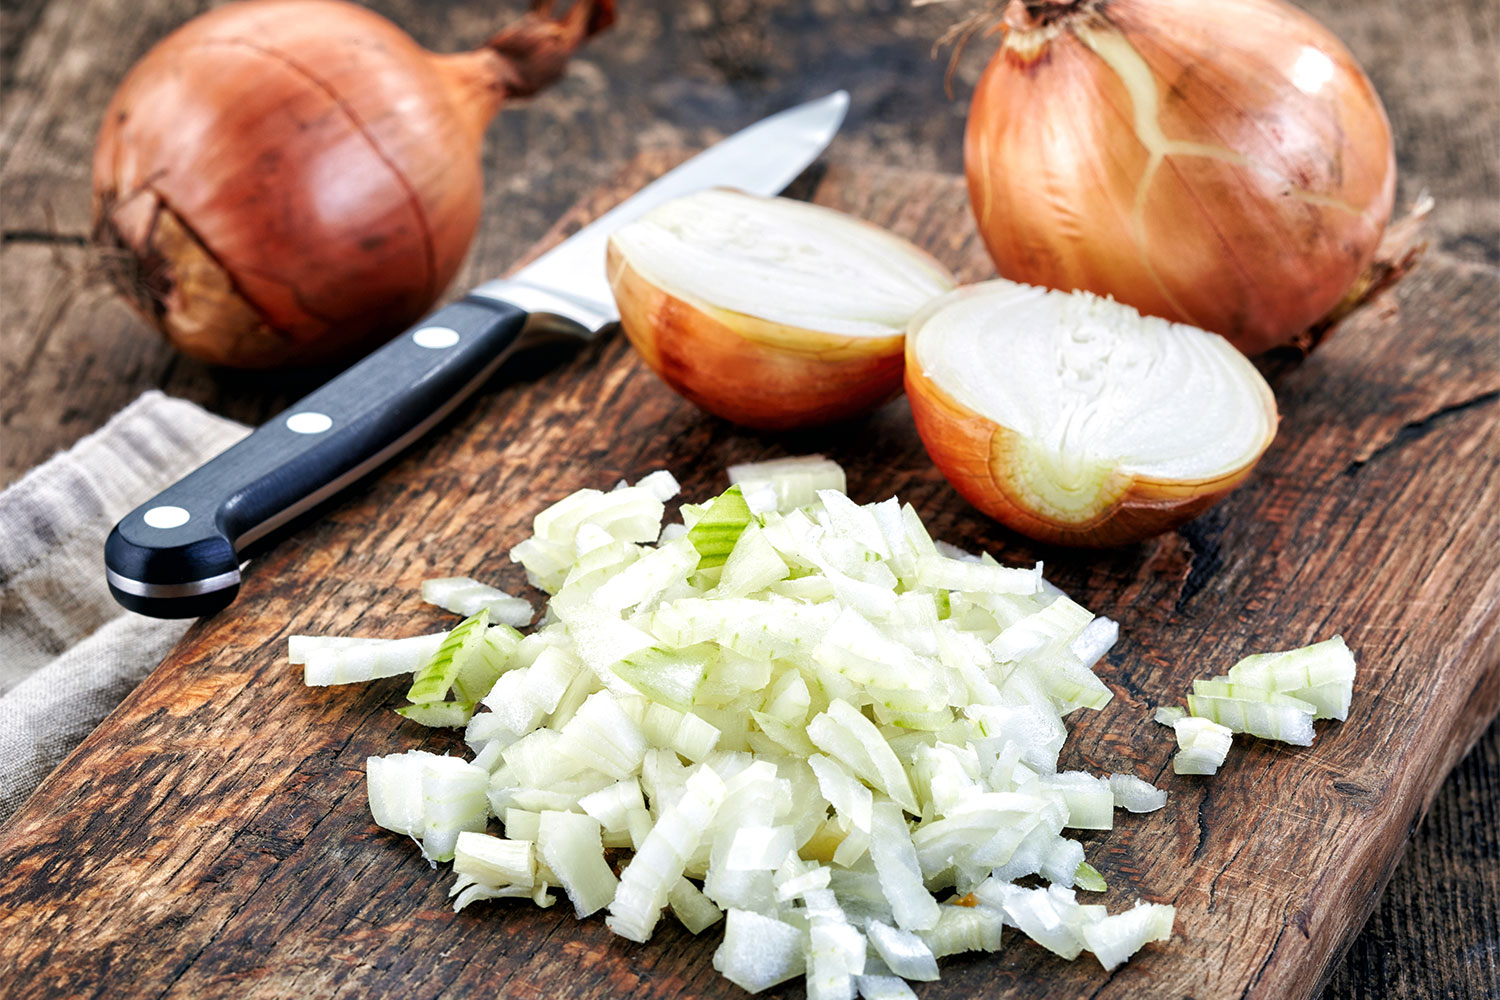 Chopping Onions 3 ?fit=800%2C533&p=1